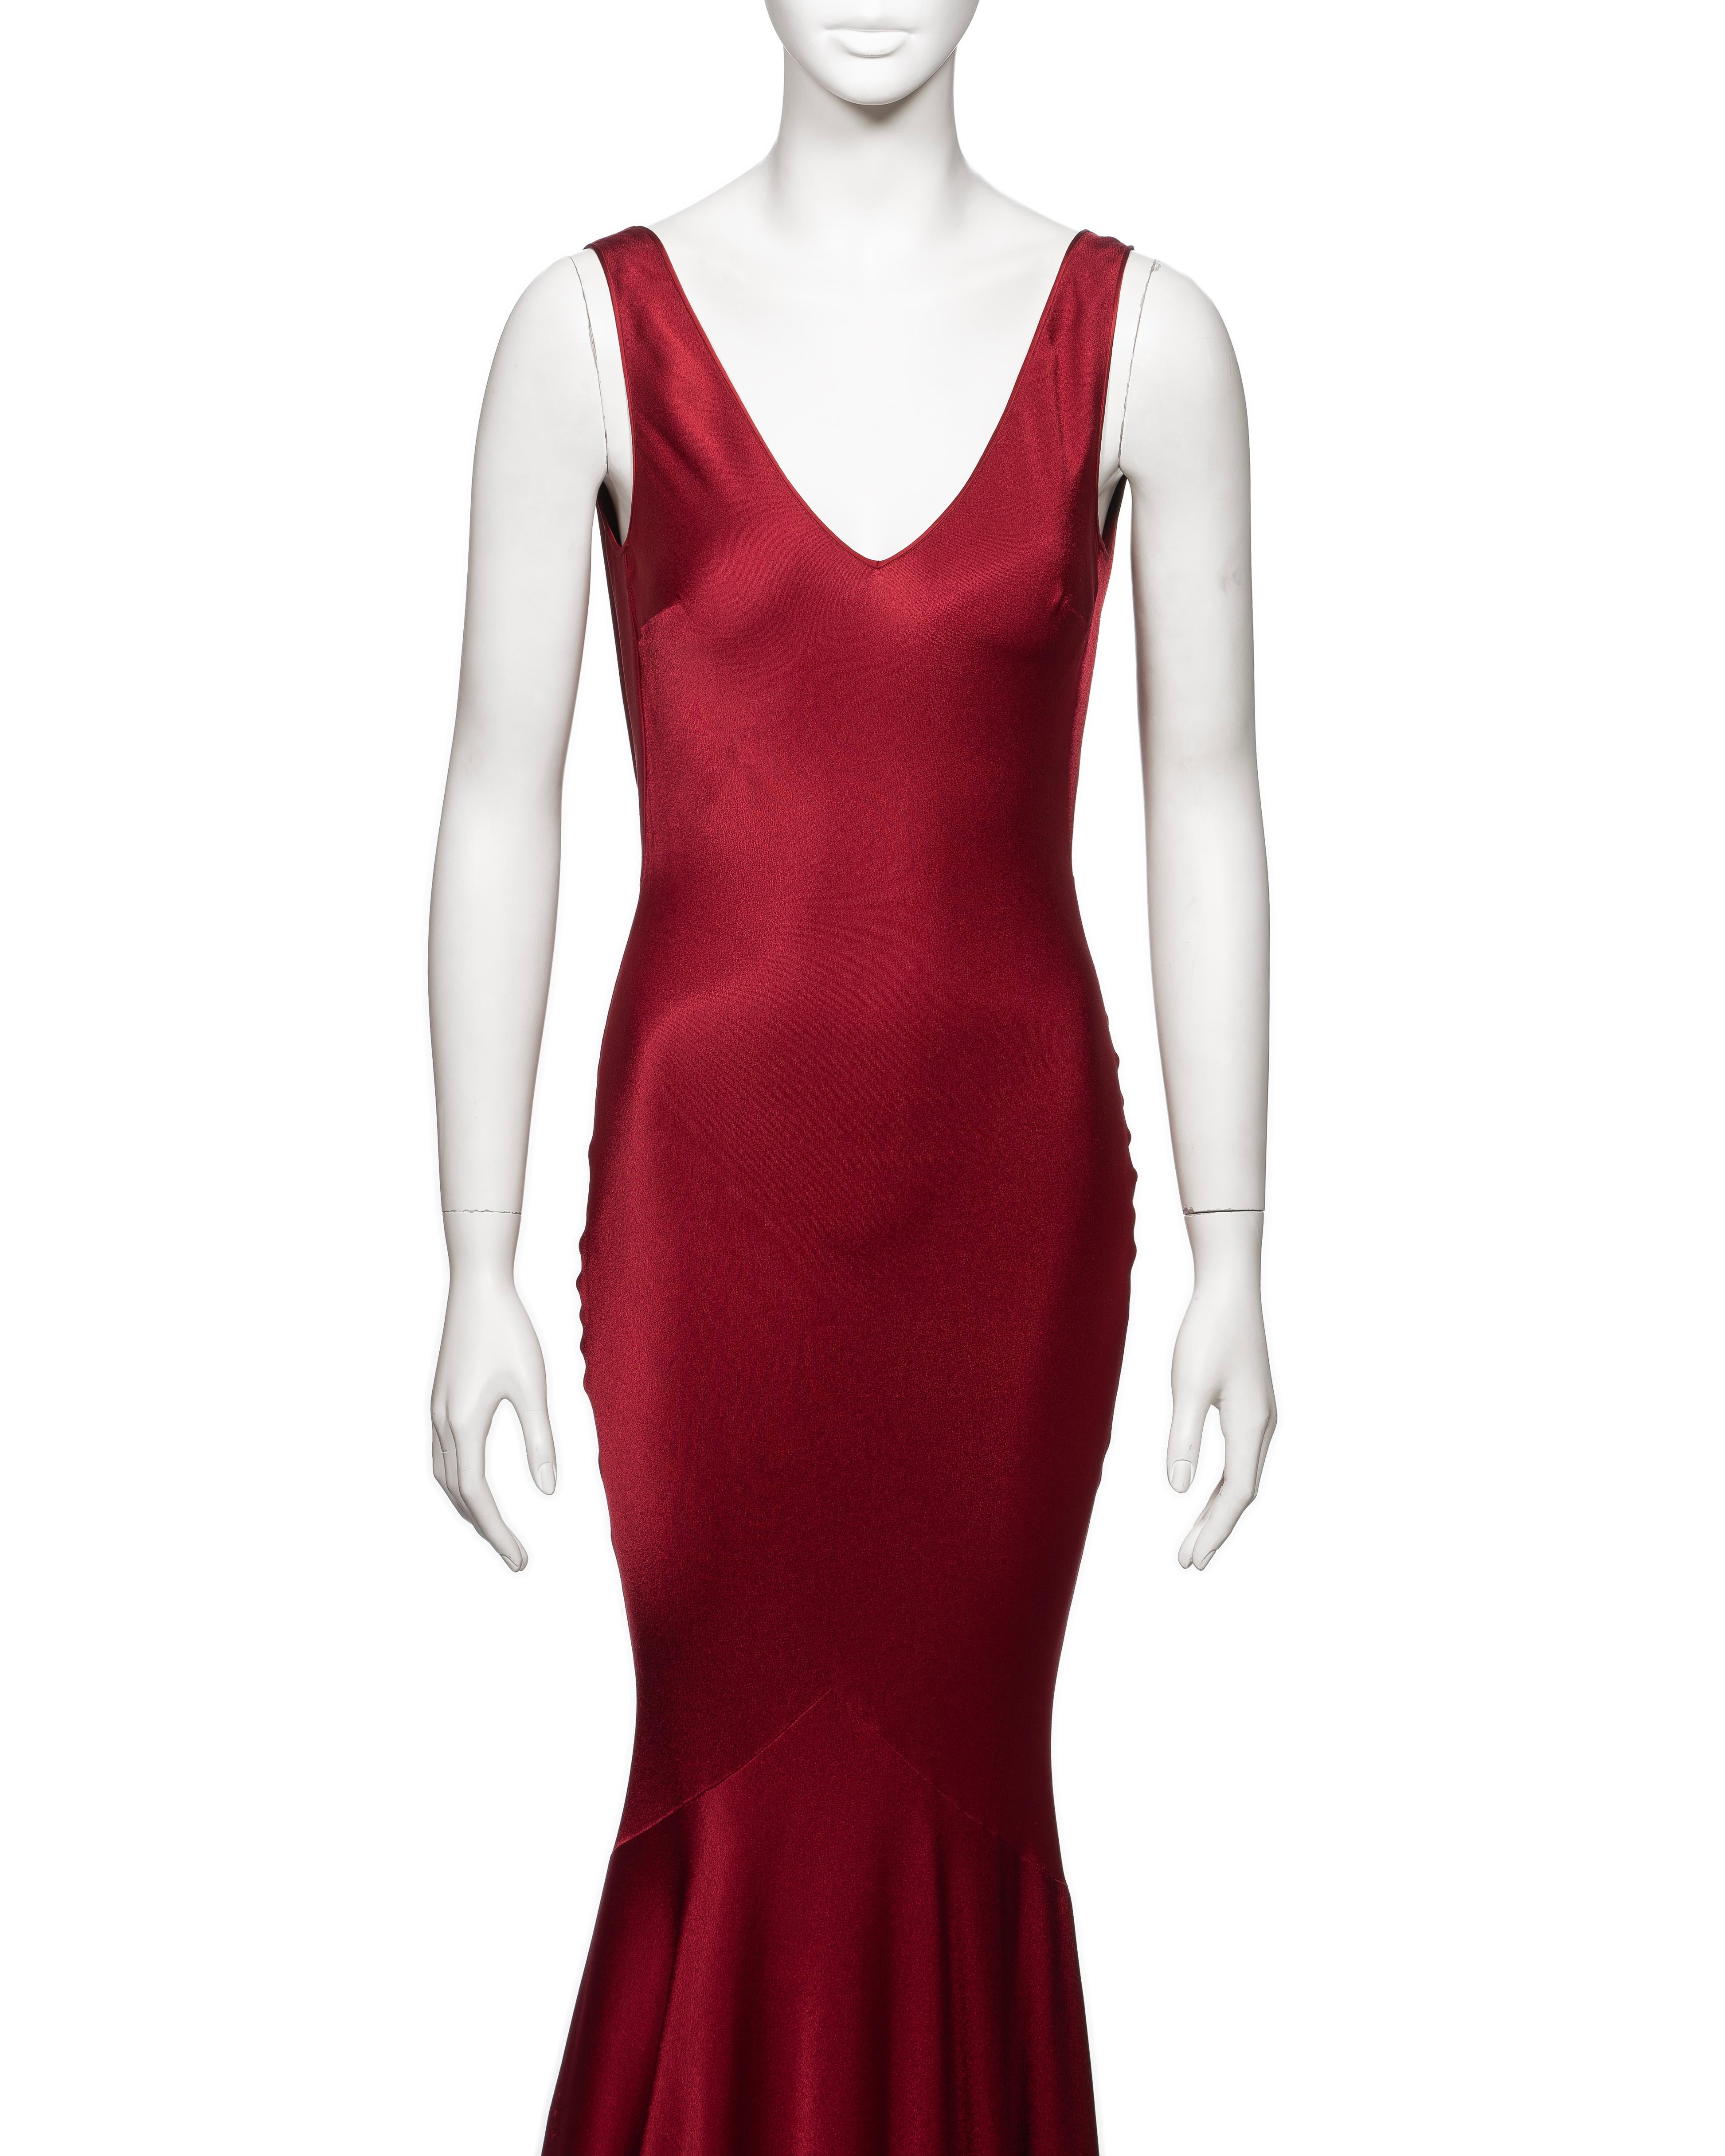 John Galliano Red Bias-Cut Crêpe Backed Satin Evening Dress, FW 2001 In Excellent Condition For Sale In London, GB